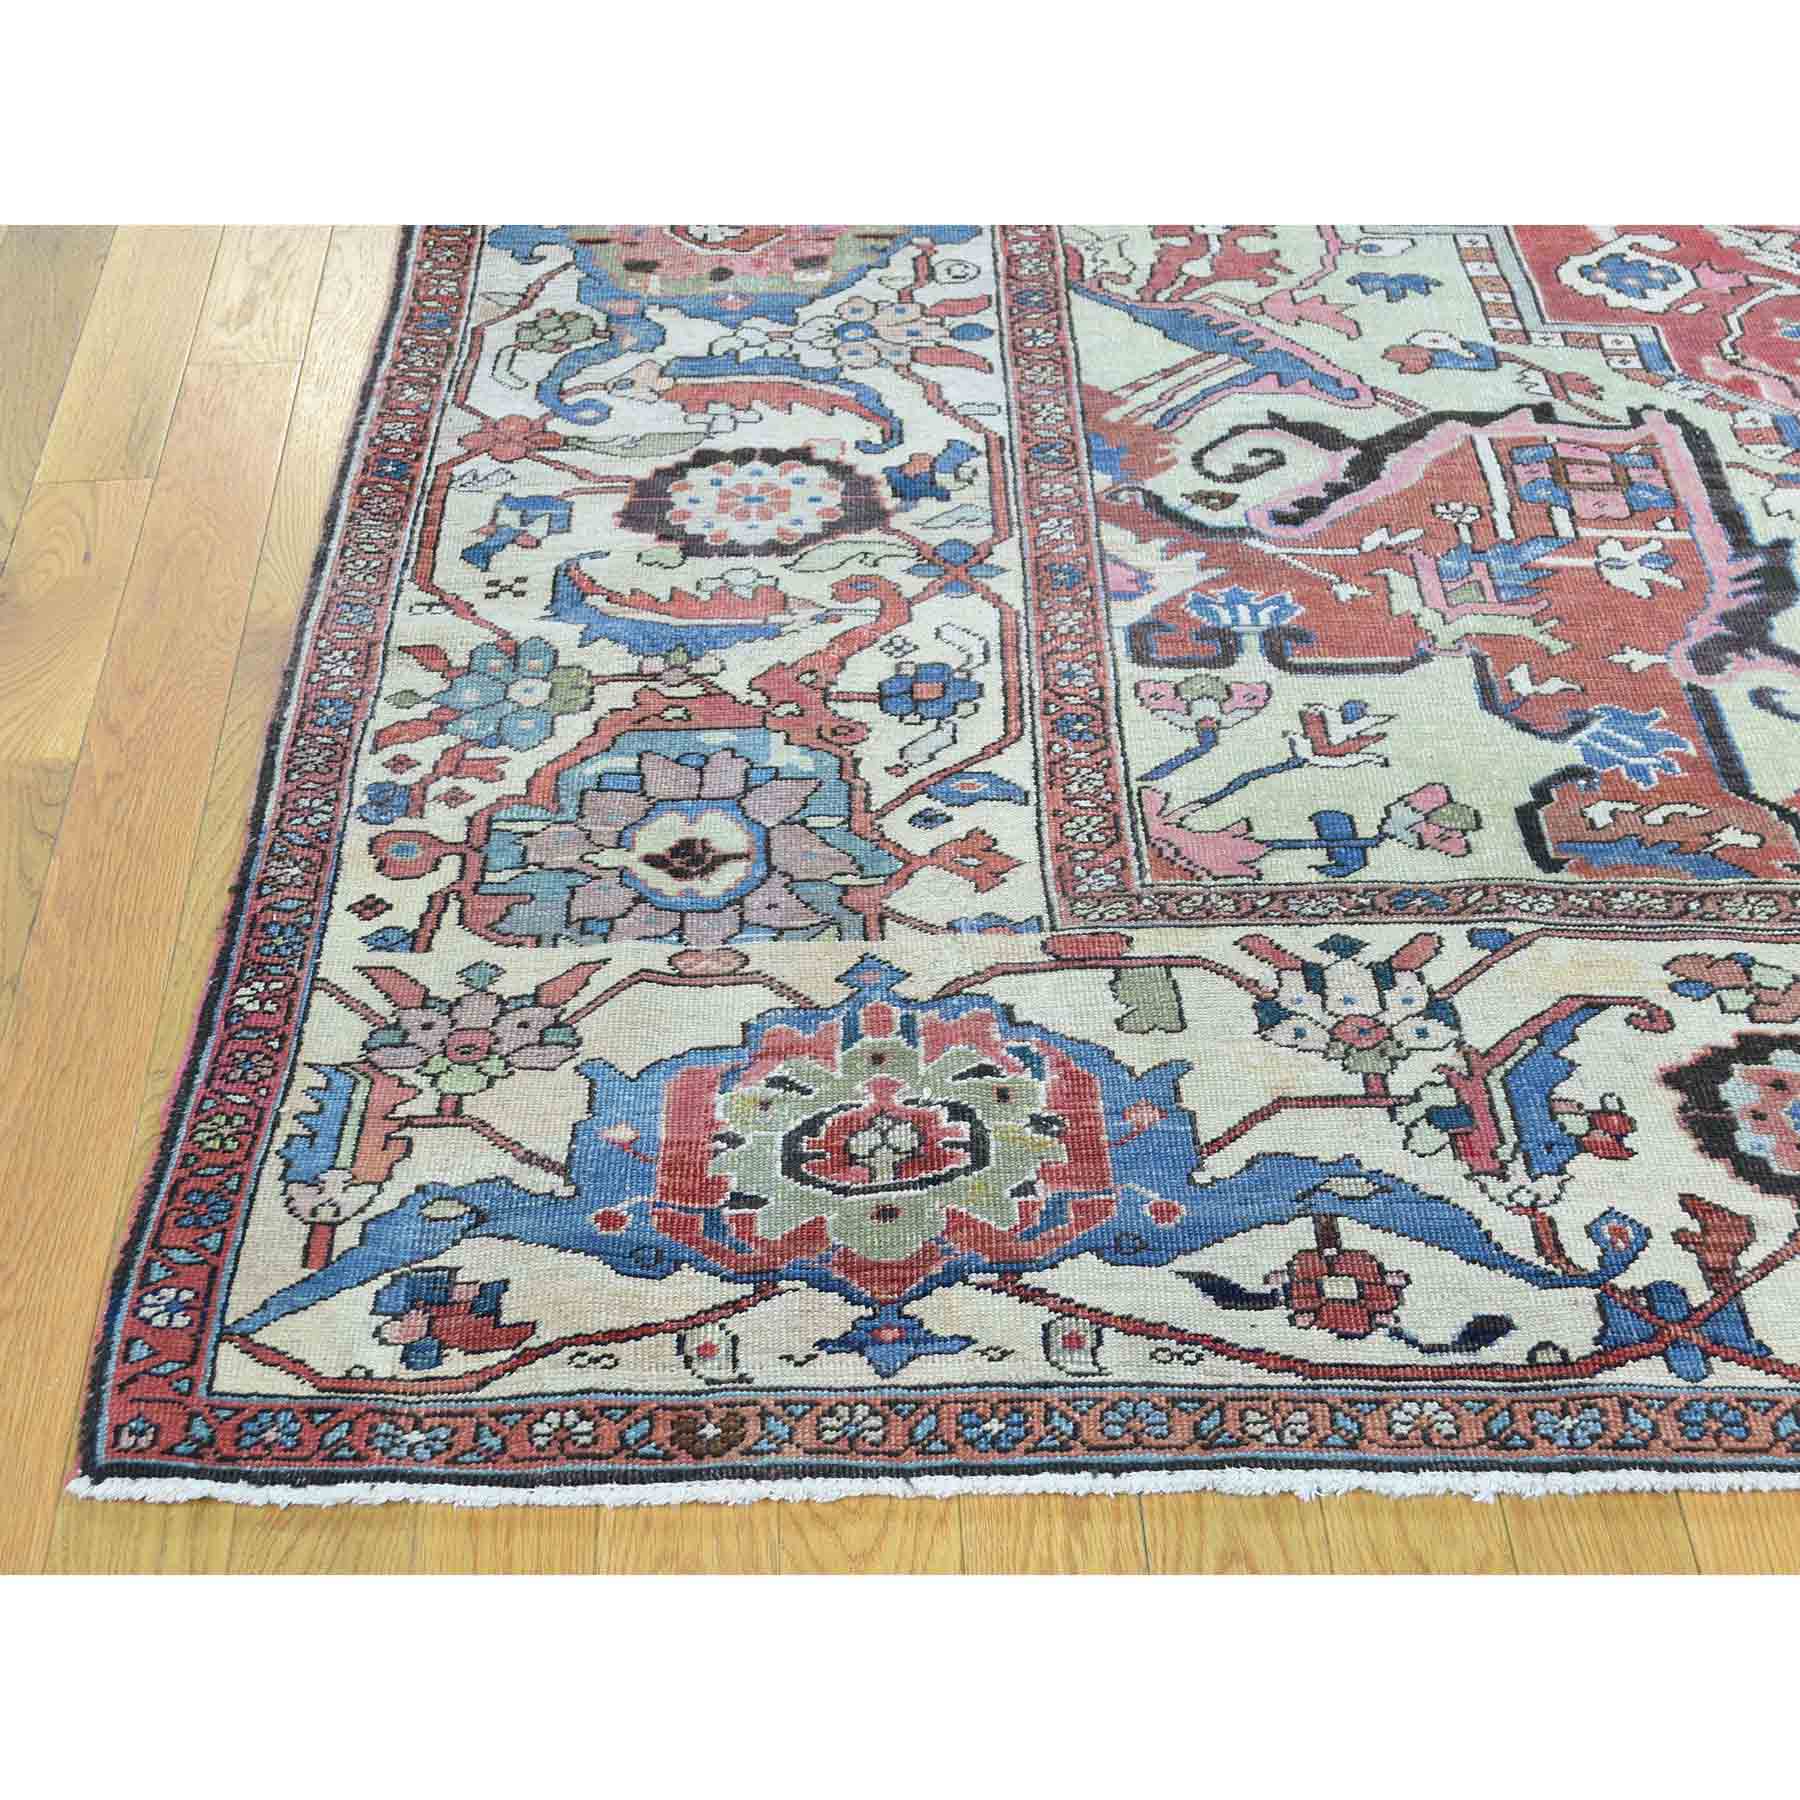 Antique-Hand-Knotted-Rug-172140